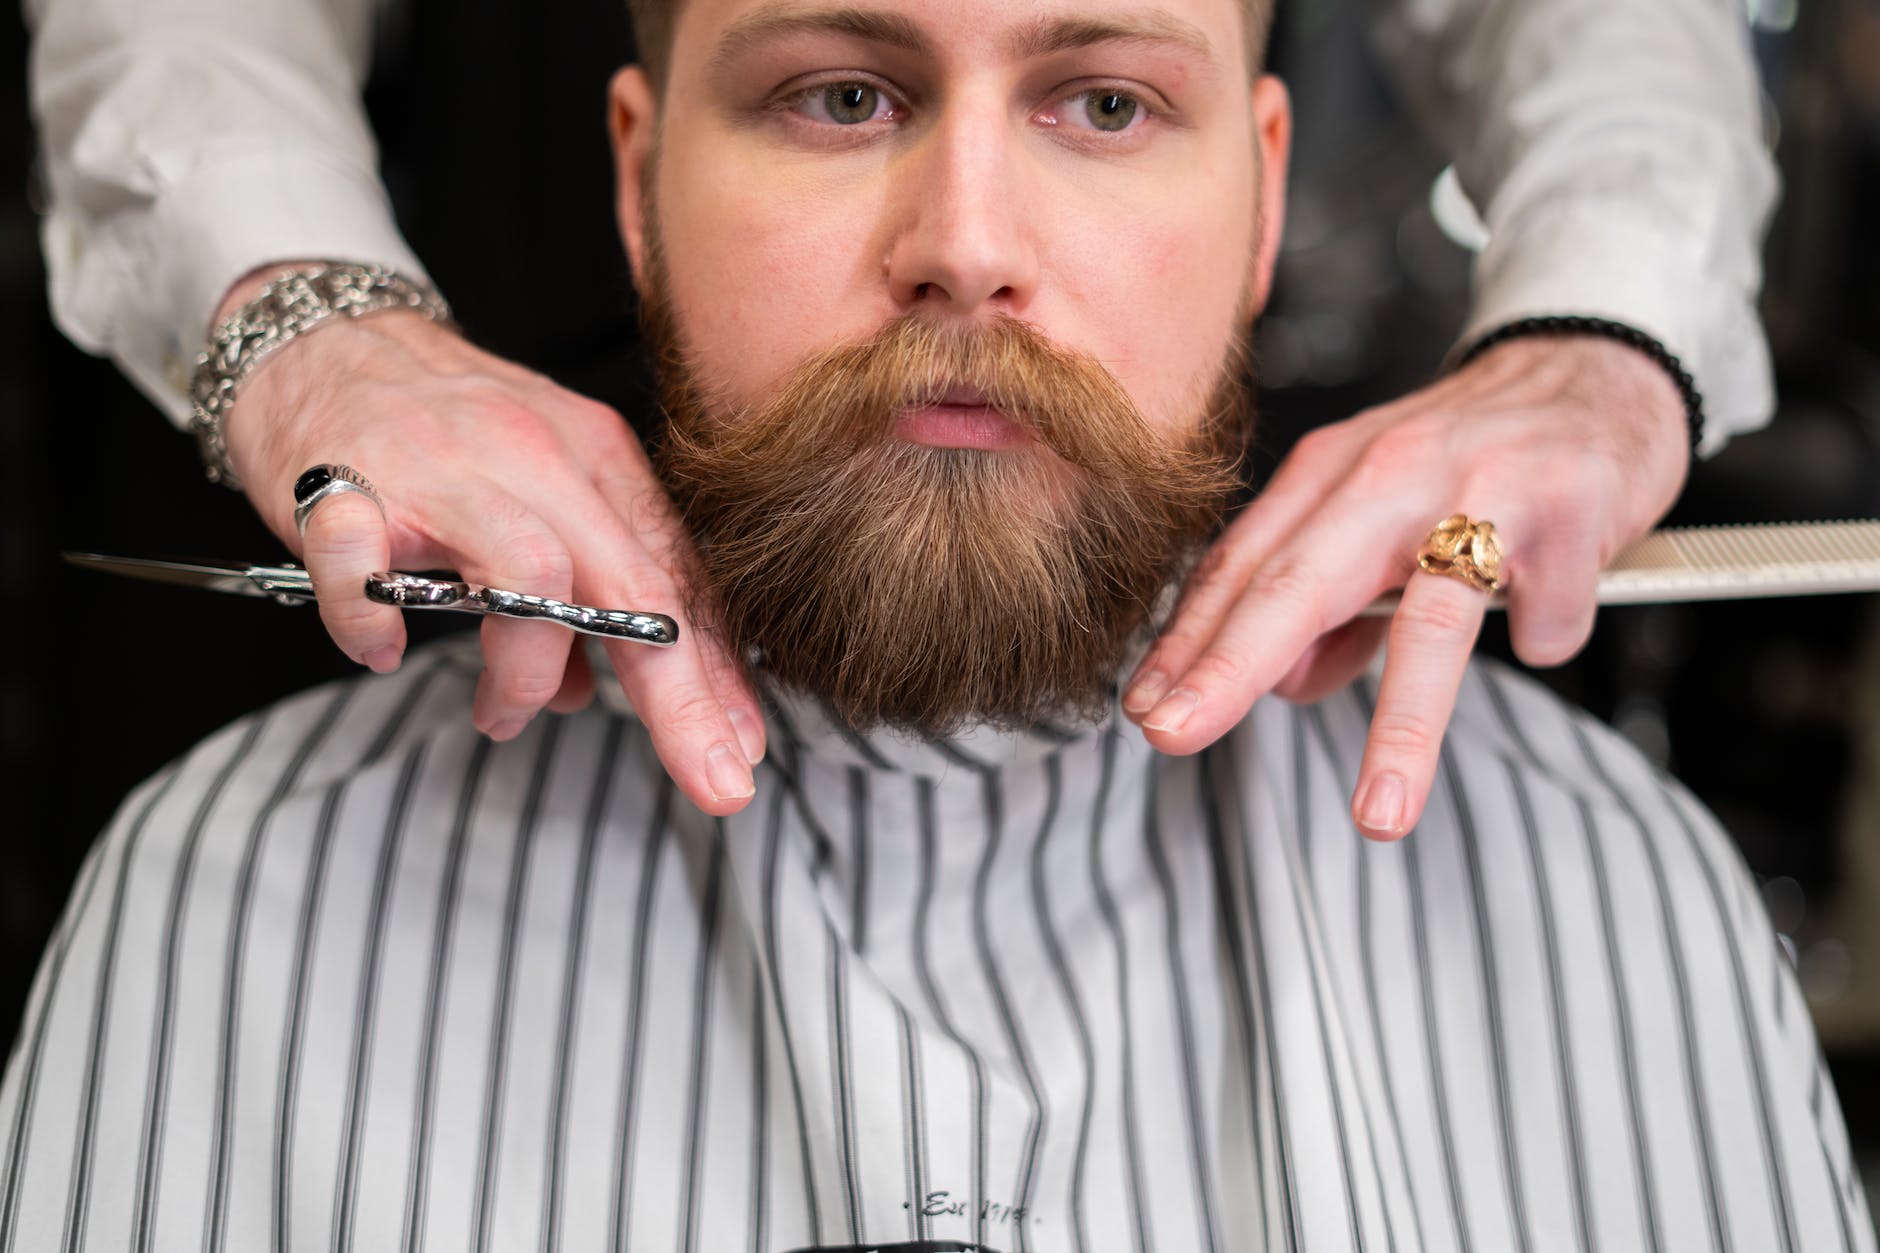 man in white and gray pinstripe having a haircut